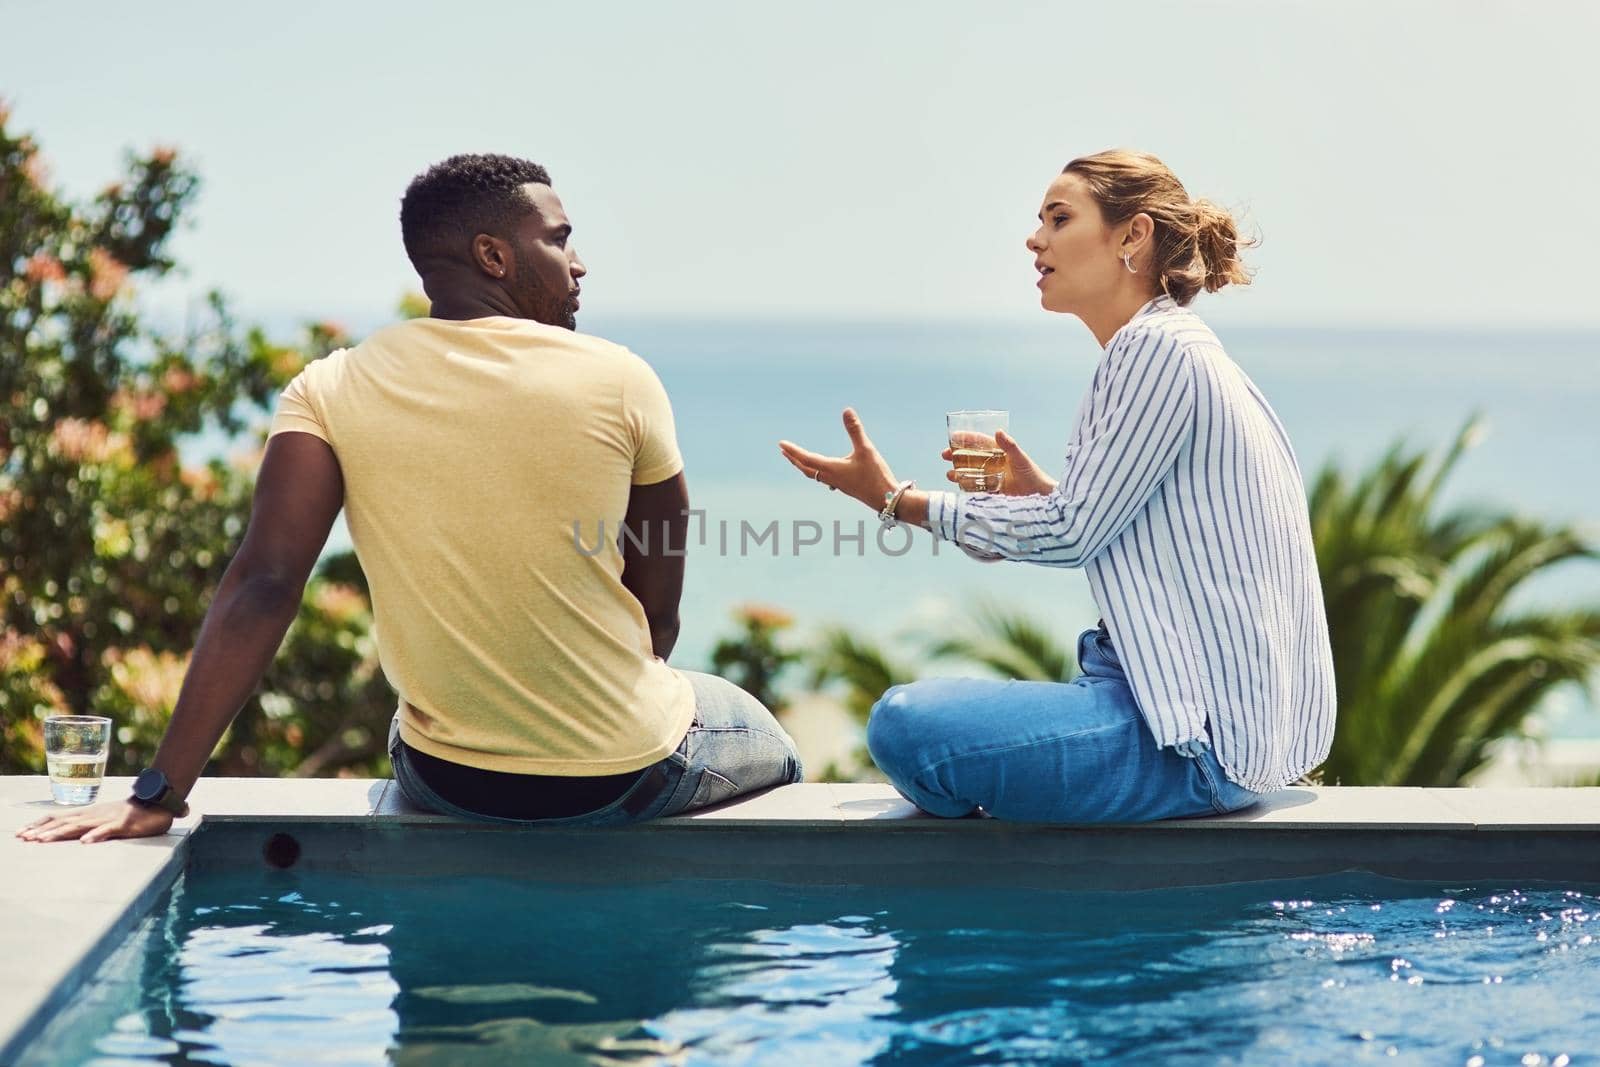 She always has a long story to tell. Rearview shot of a young couple enjoying drinks together while relaxing outdoors on holiday